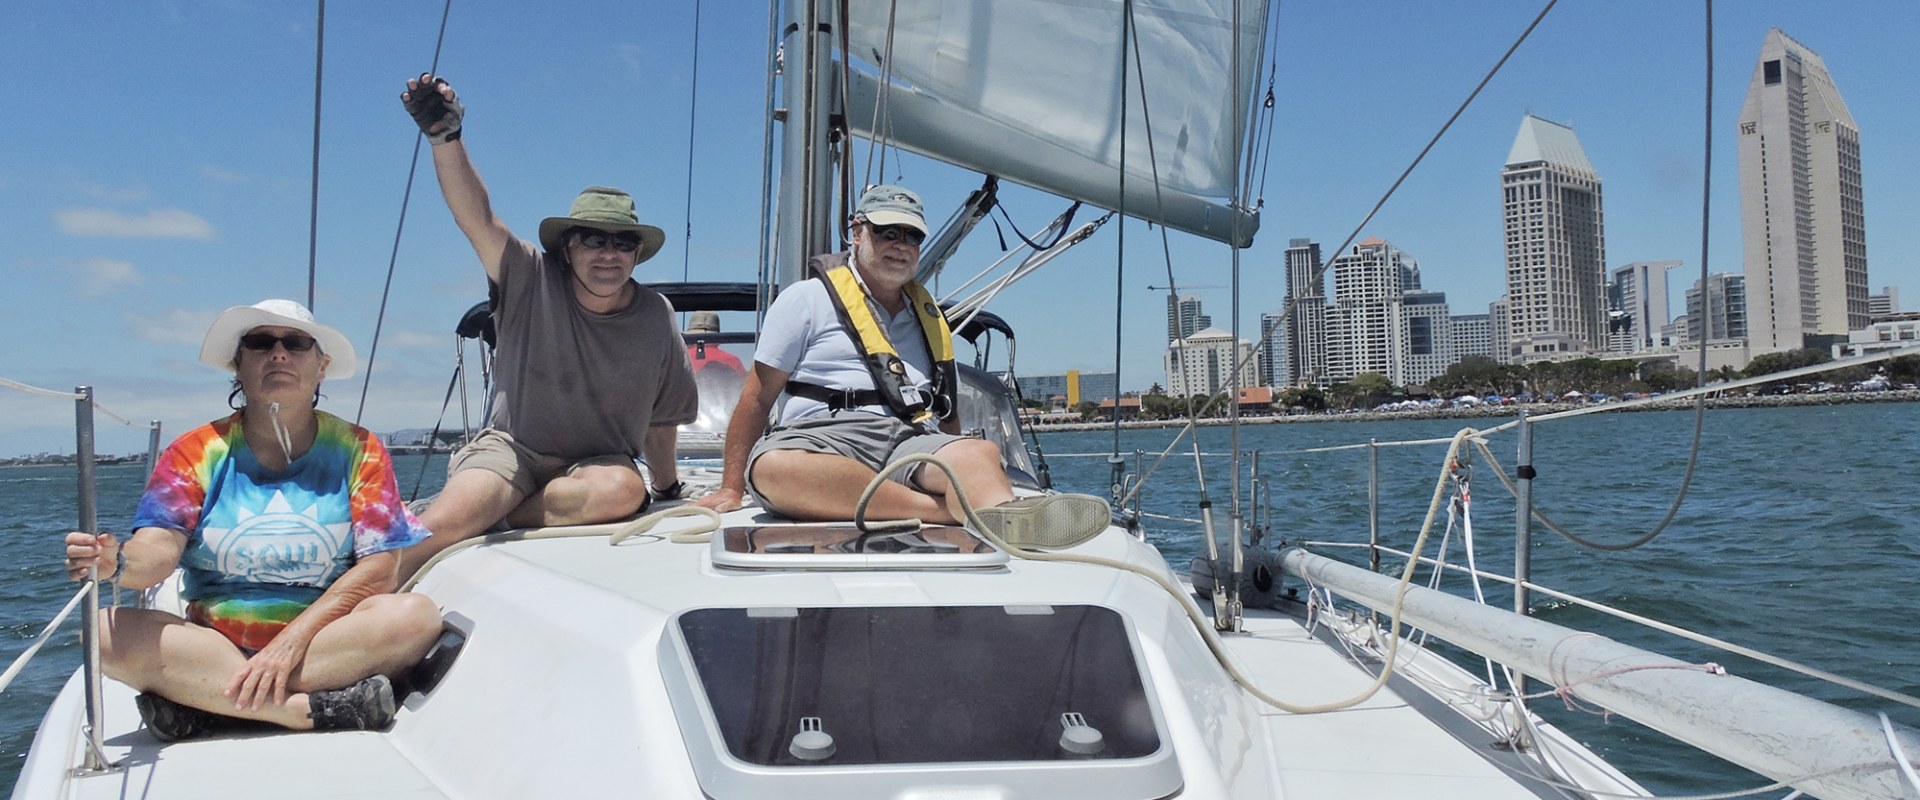 The Rise of Women in Sailing: A Look at the Southern California Women's Boat Sailing Organization